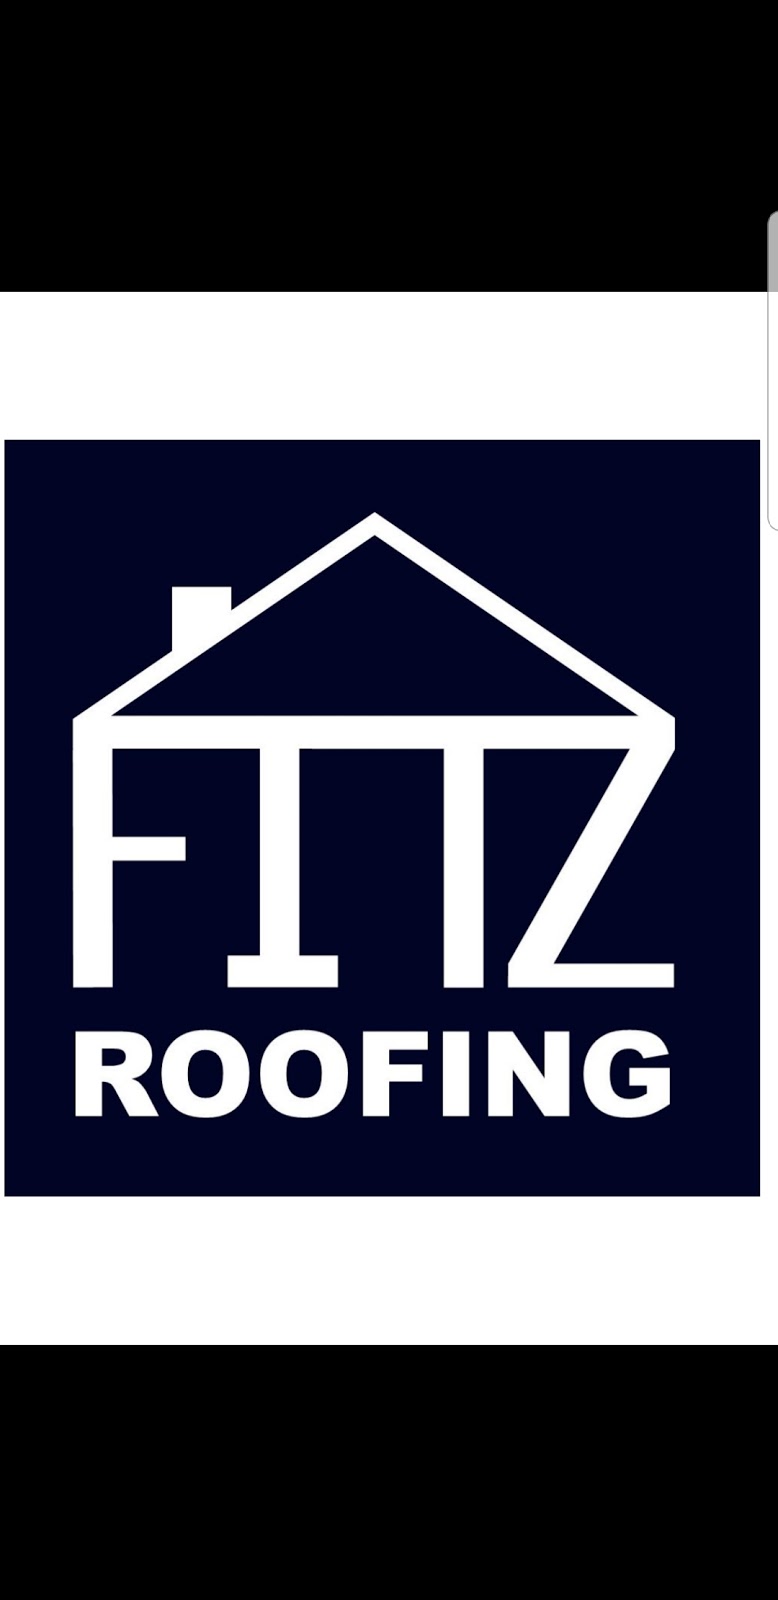 Fitz Roofing | Taylorwood Ave, Caledon, ON L7E, Taylorwood Ave, Caledon, ON L7E 1J2, Canada | Phone: (647) 227-8570